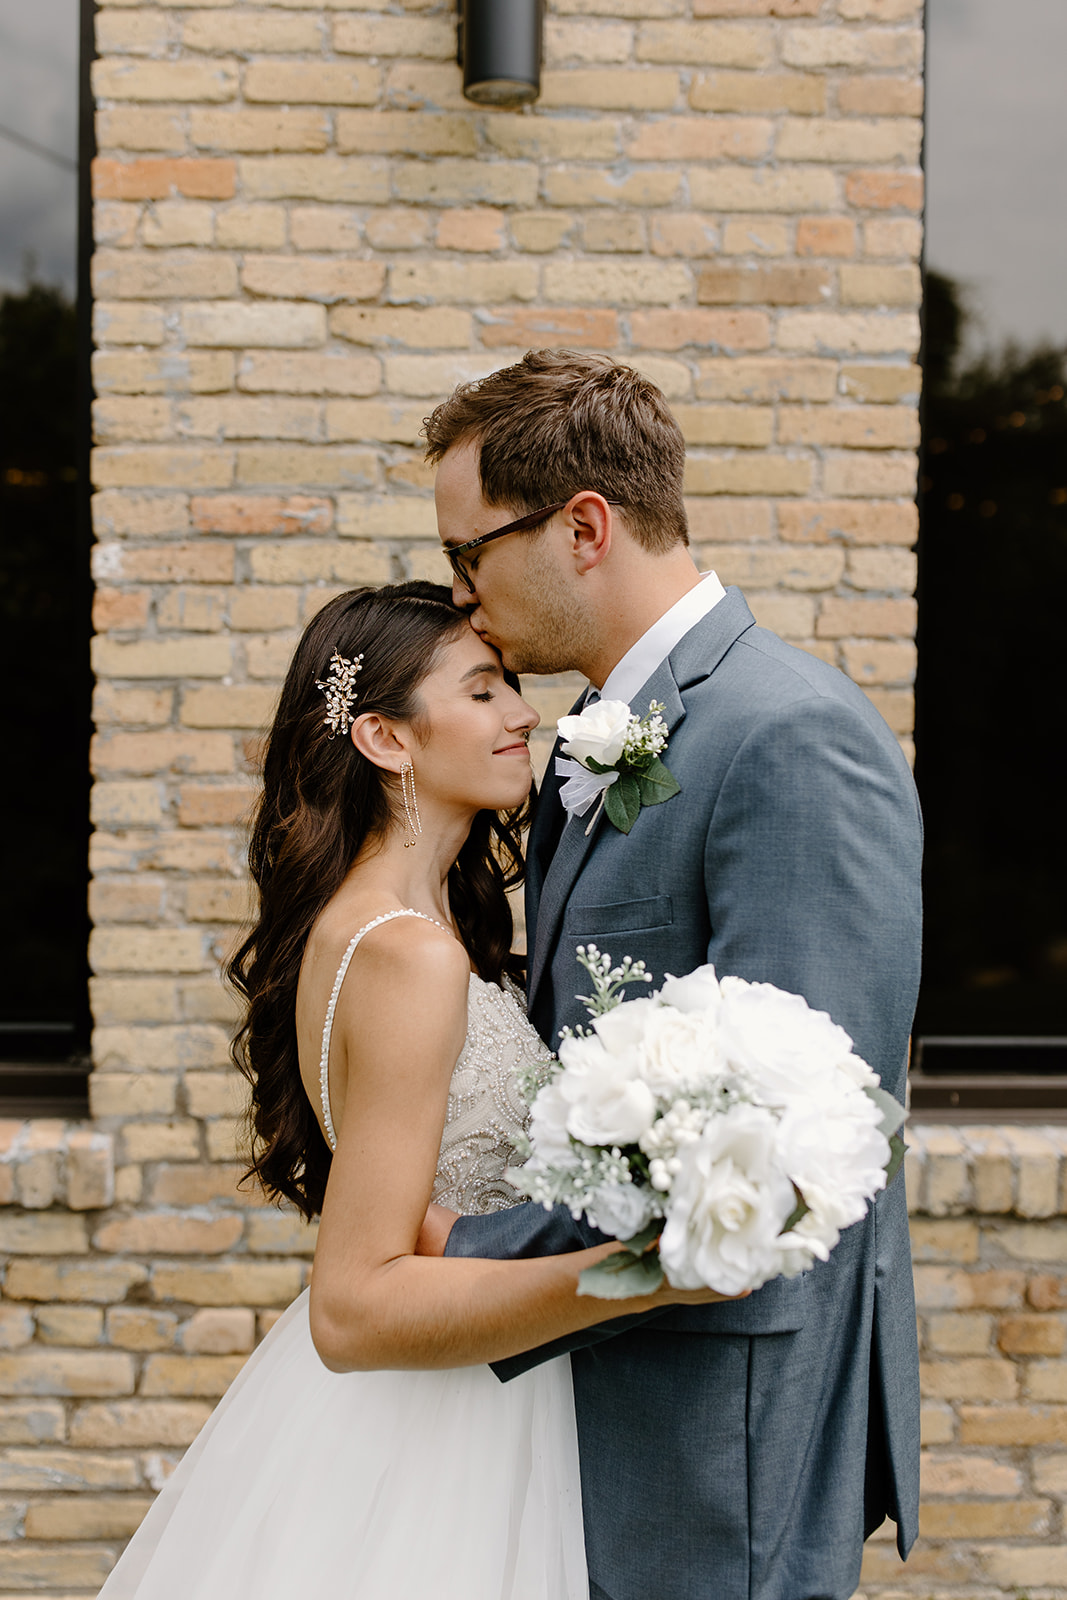 Groom kisses his bride in front of a brick wall with black windows